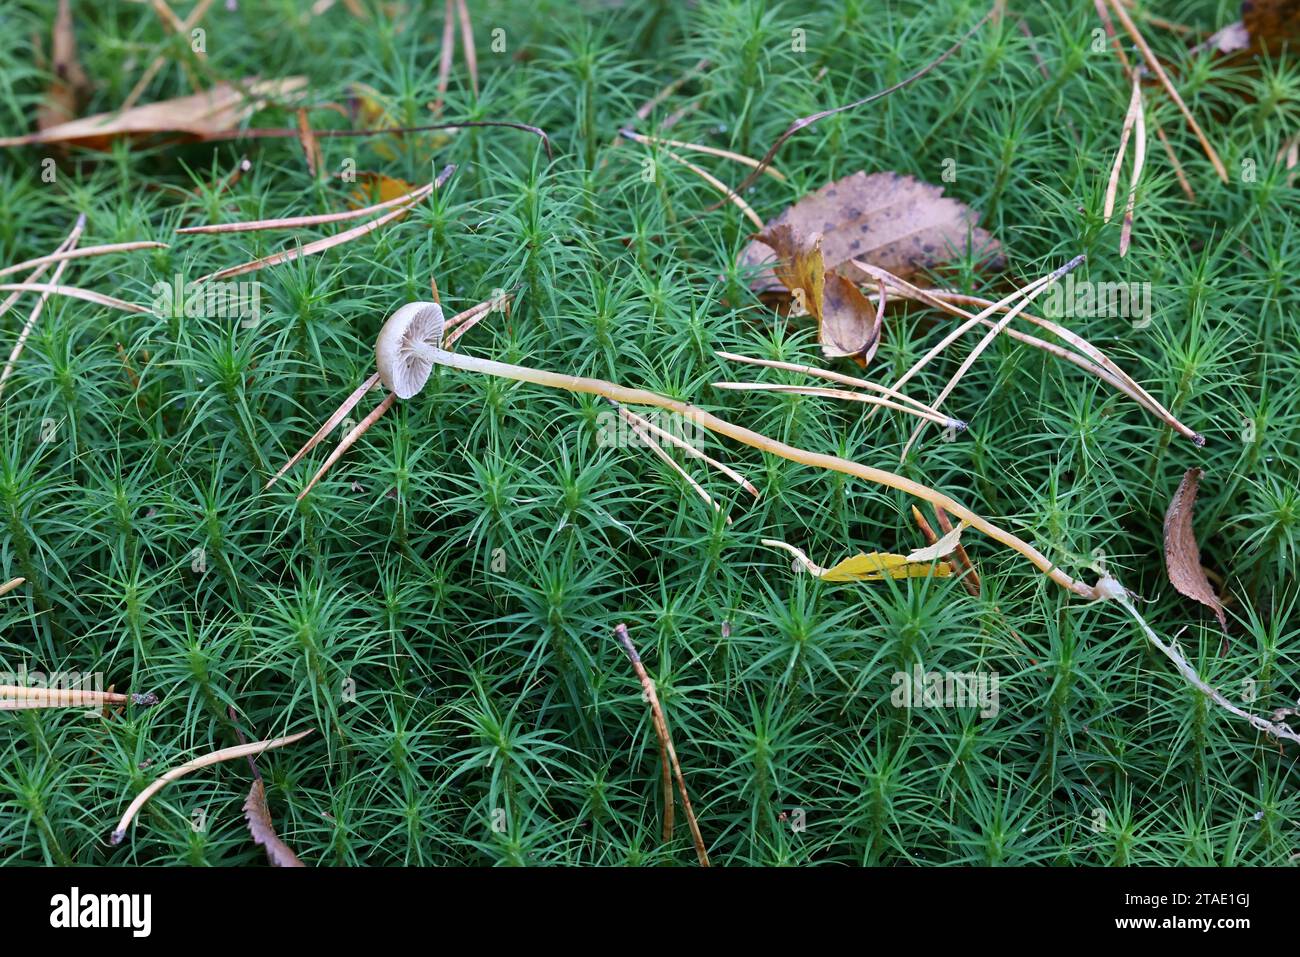 Hypholoma elongatum, commonly known as Sphagnum Brownie, wild mushroom from Finland Stock Photo